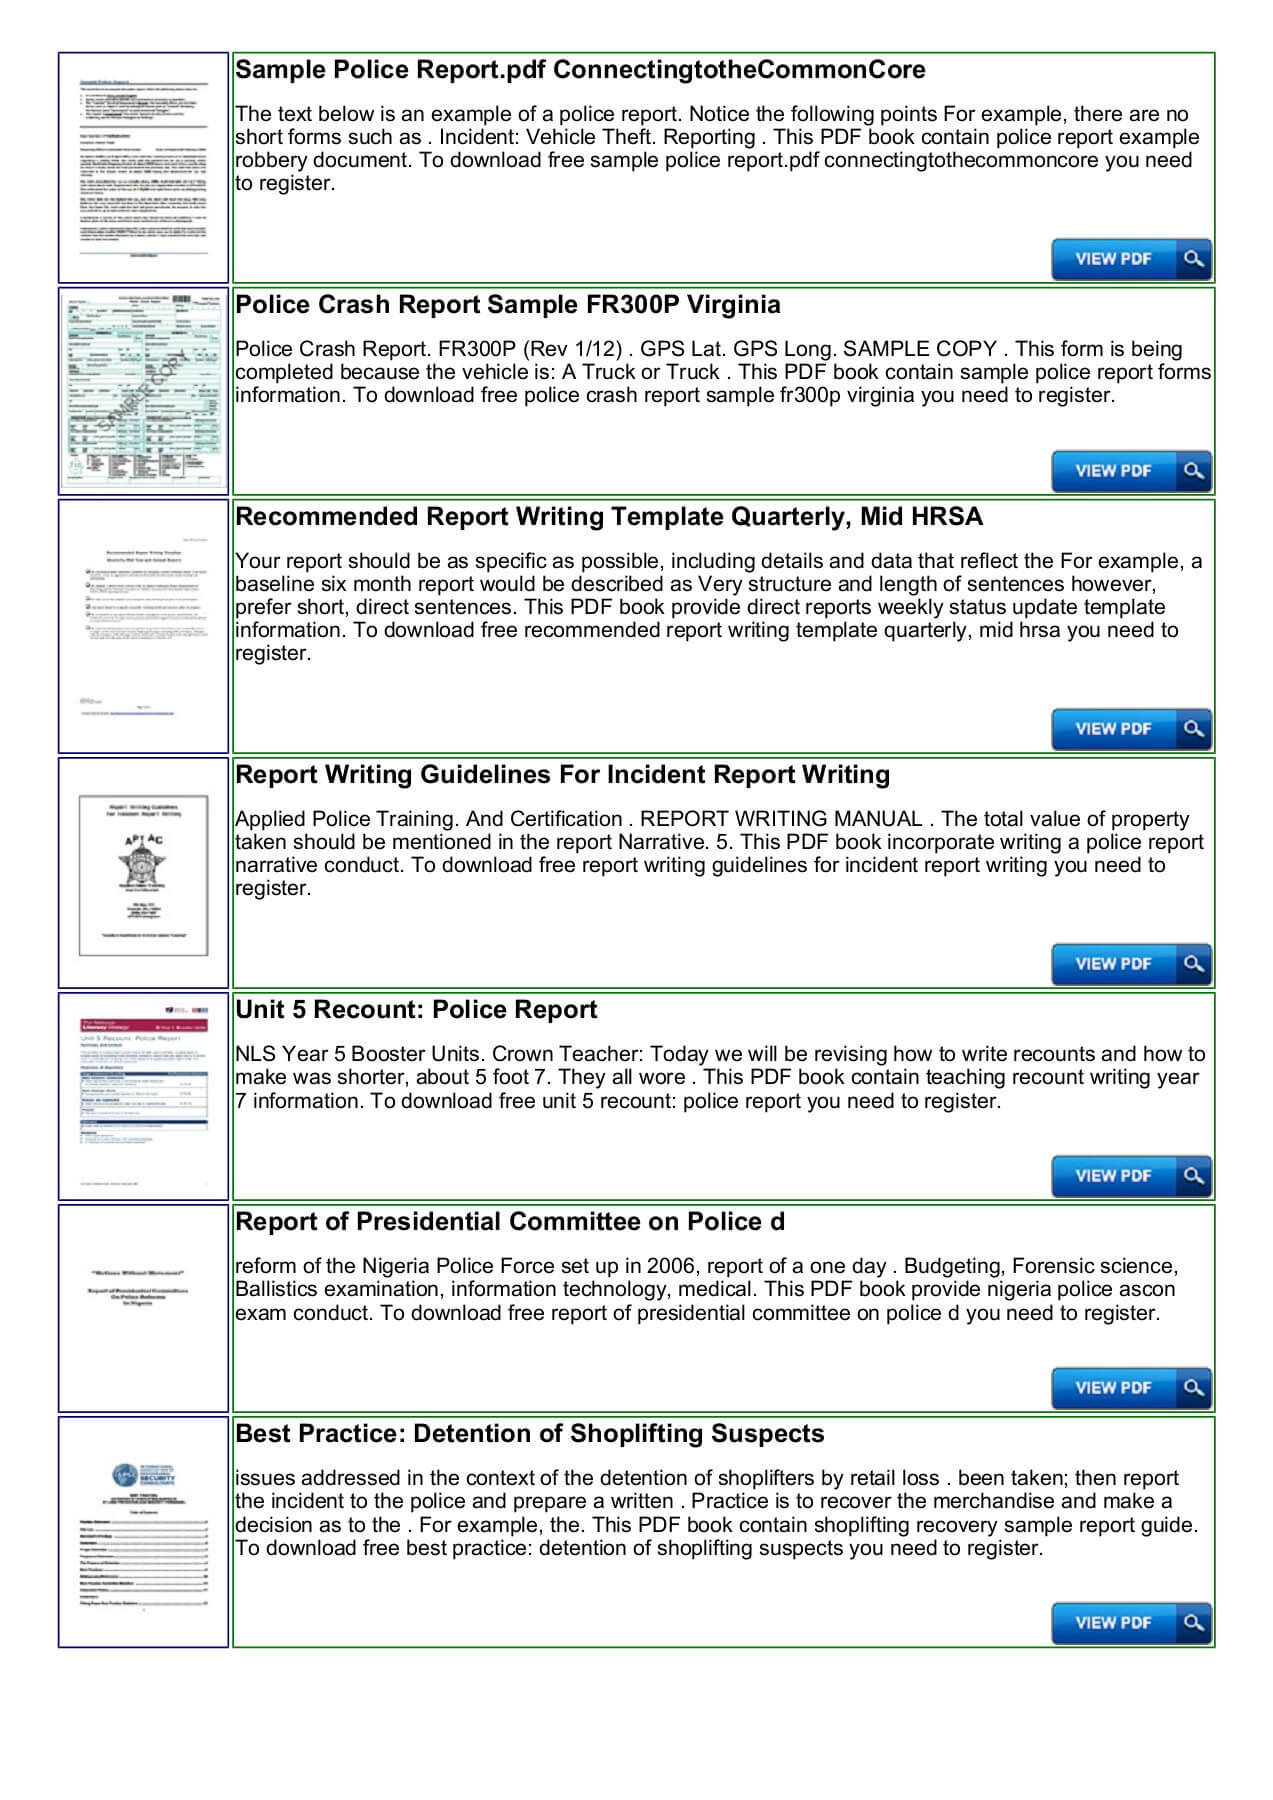 Police Shoplifting Report Writing Template Sample Pages 1 Regarding Report Writing Template Download